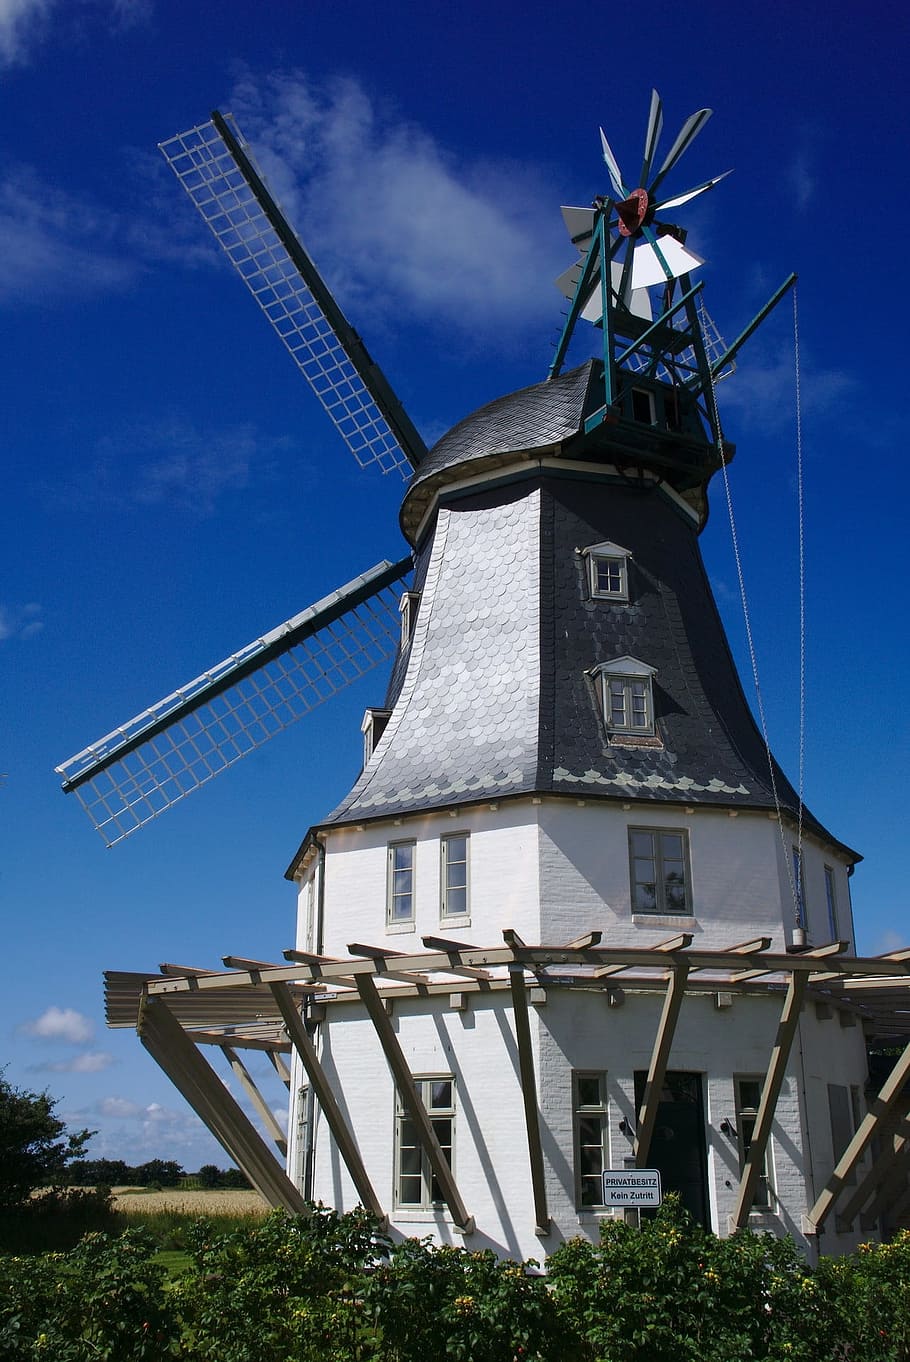 Windmill, Wind, Mill, Old, sky, wind, mill, traditional, wooden, friesland, architecture